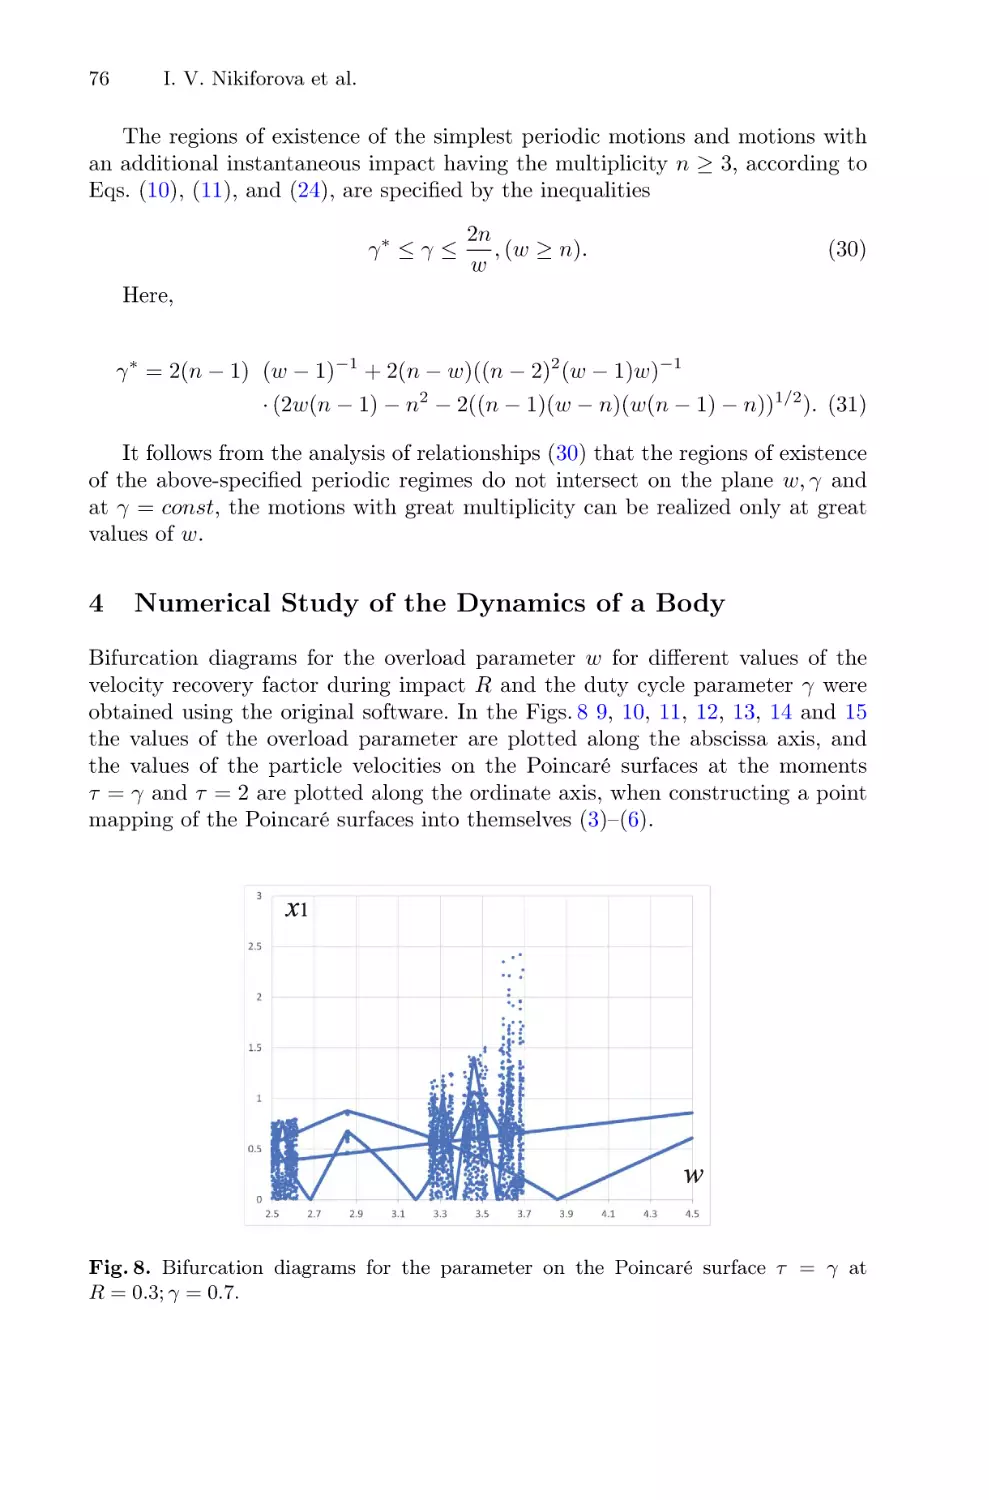 4 Numerical Study of the Dynamics of a Body